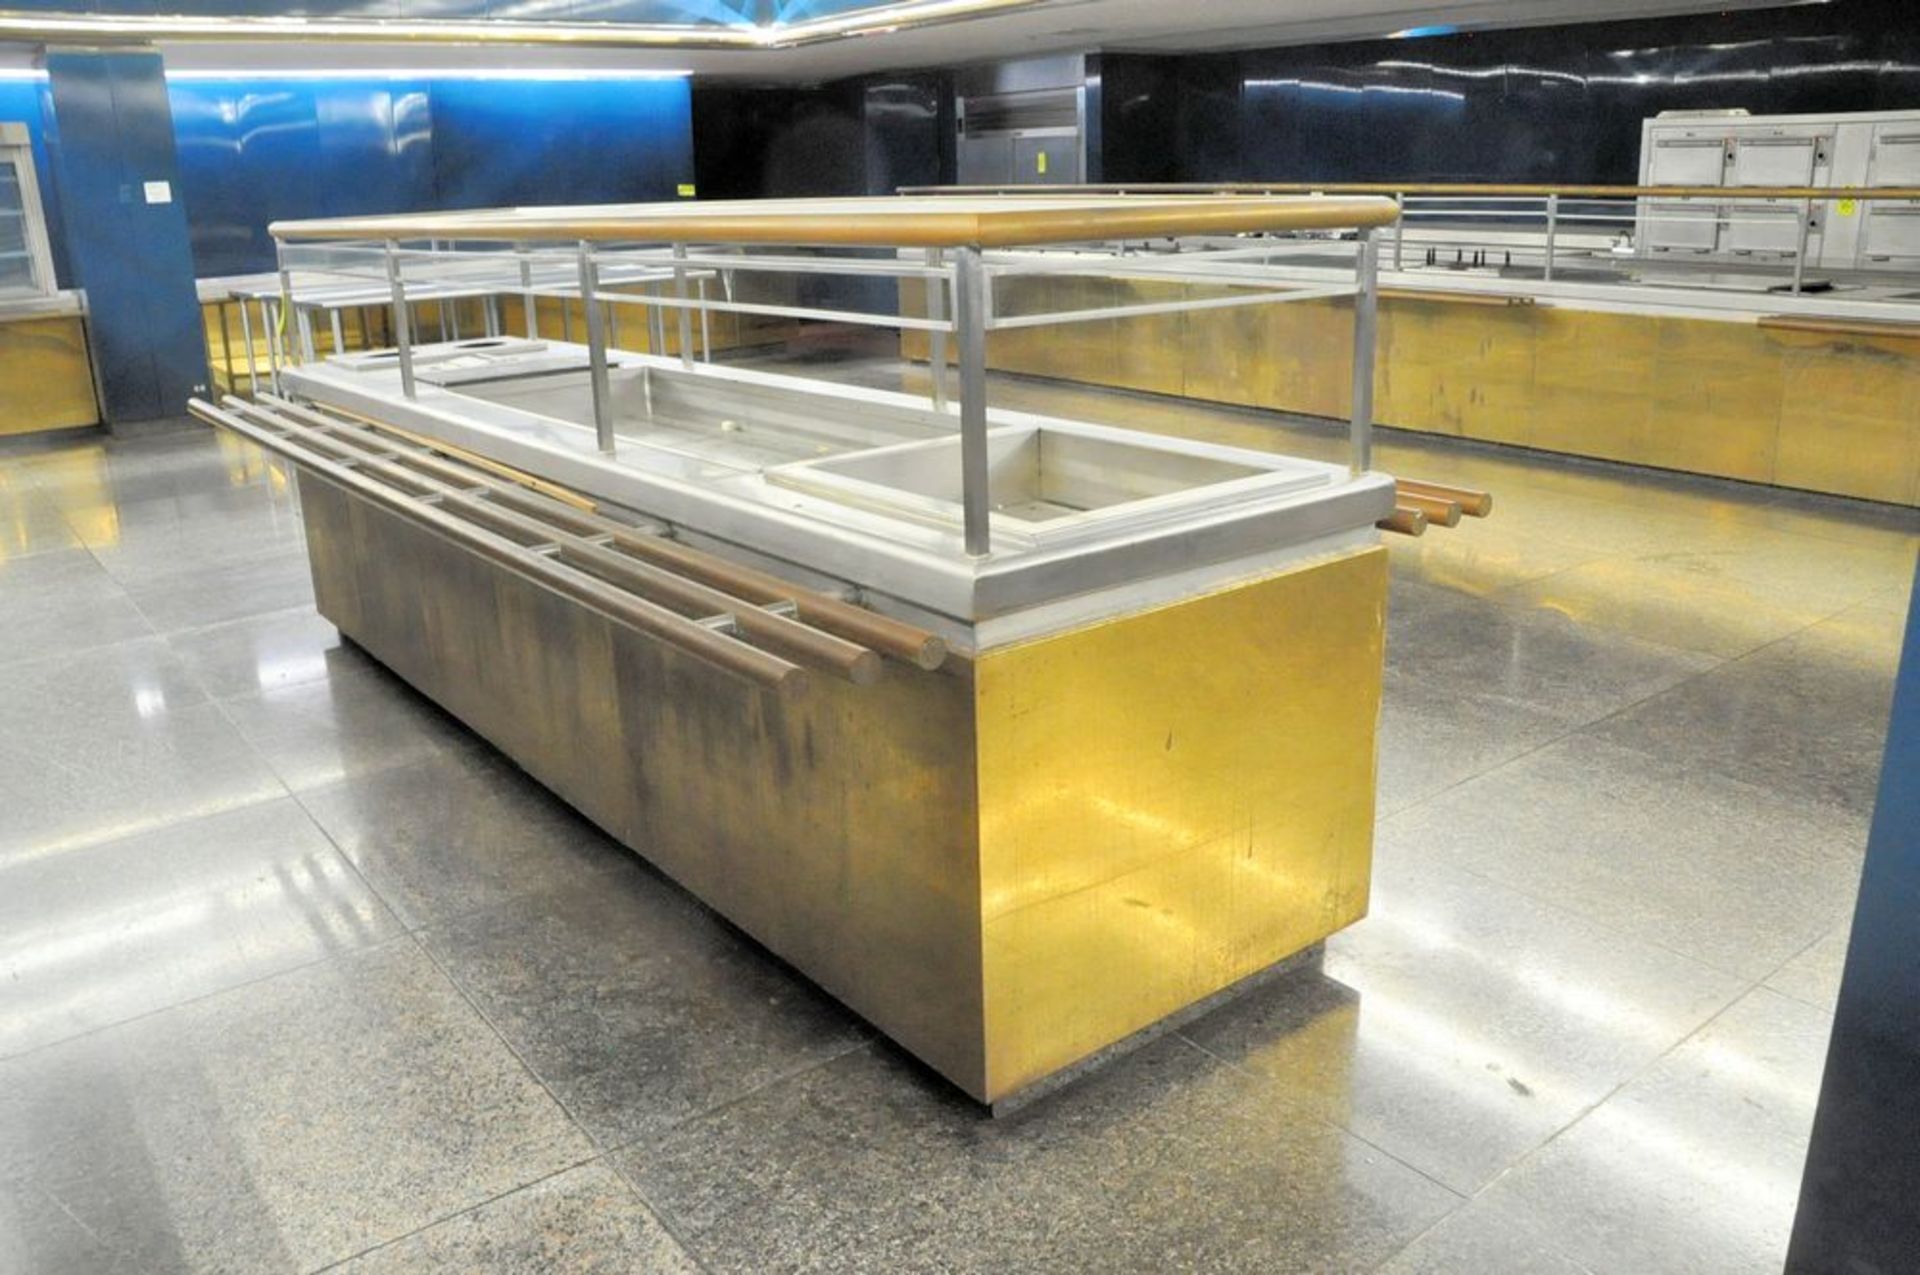 Stainless Steel Hot Foods Buffet Station, 3' x 12', Overhead Glass Sneeze Guard Hood - Image 4 of 8